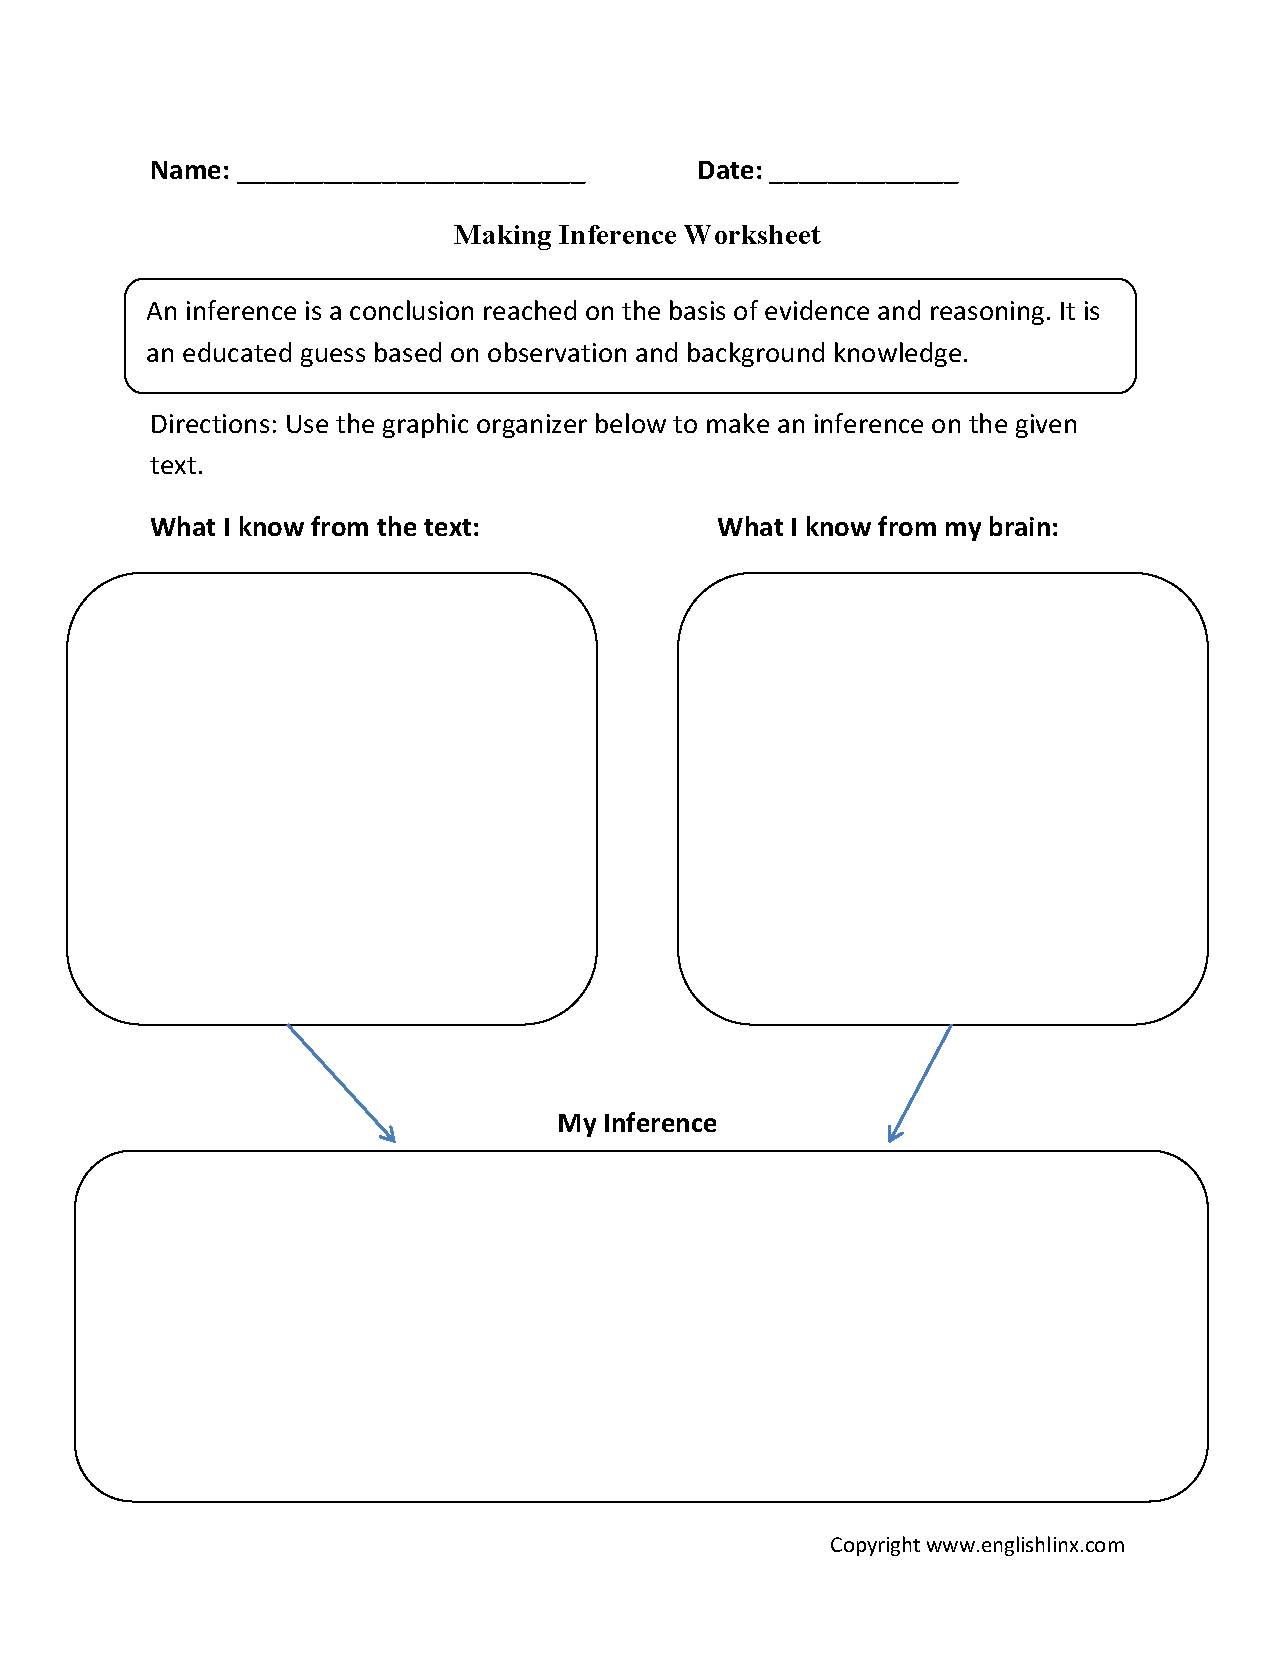 17 Best Images of Second Grade Making Inferences Worksheets  Inference Graphic Organizer 